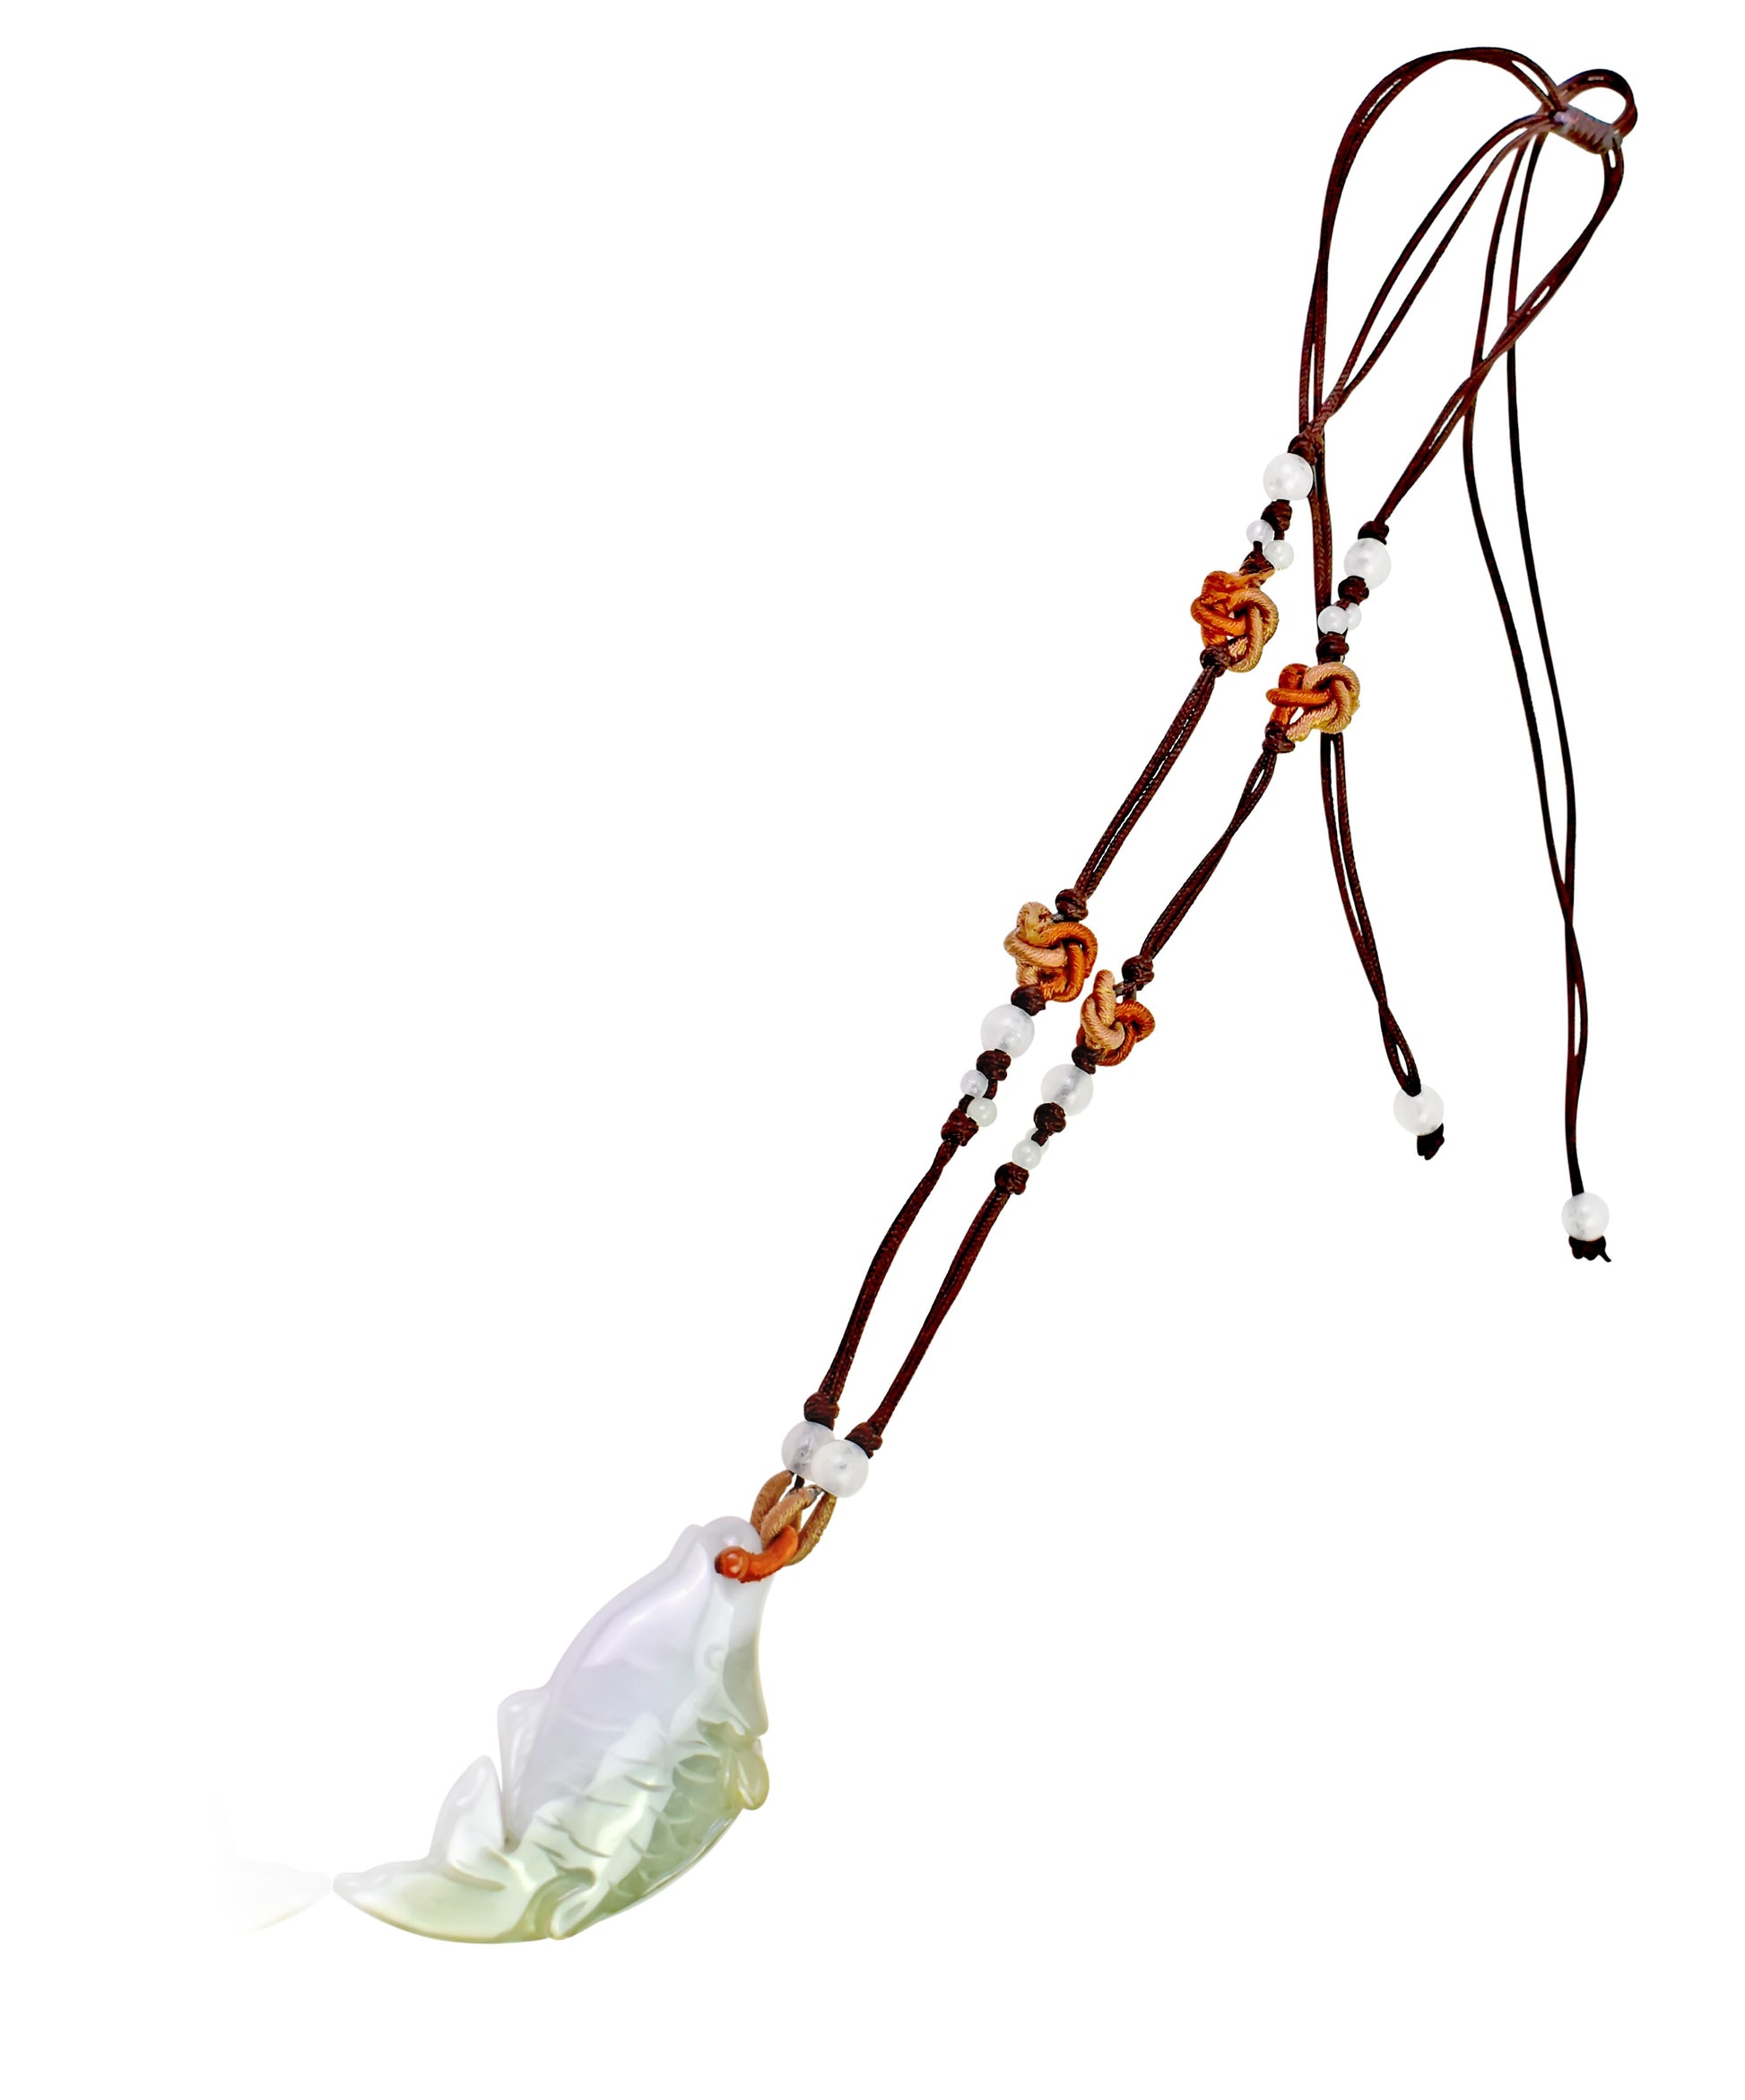 Attract Wealth and Abundance with a Koi Fish Necklace